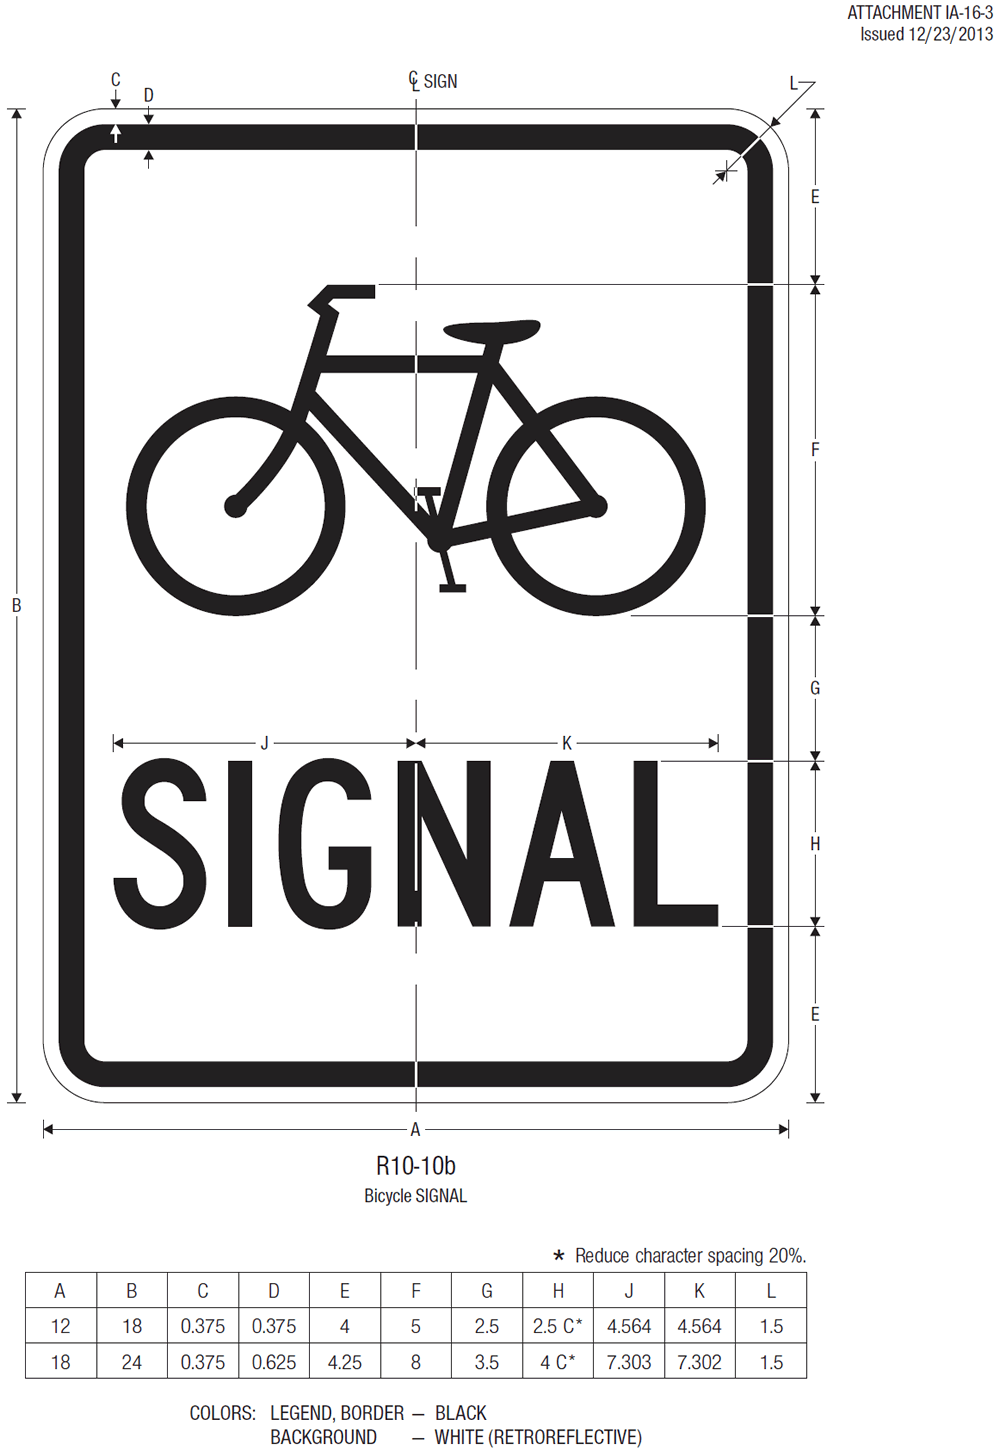 Attachment IA-16-03: R10-10b Bicycle SIGNAL Sheet